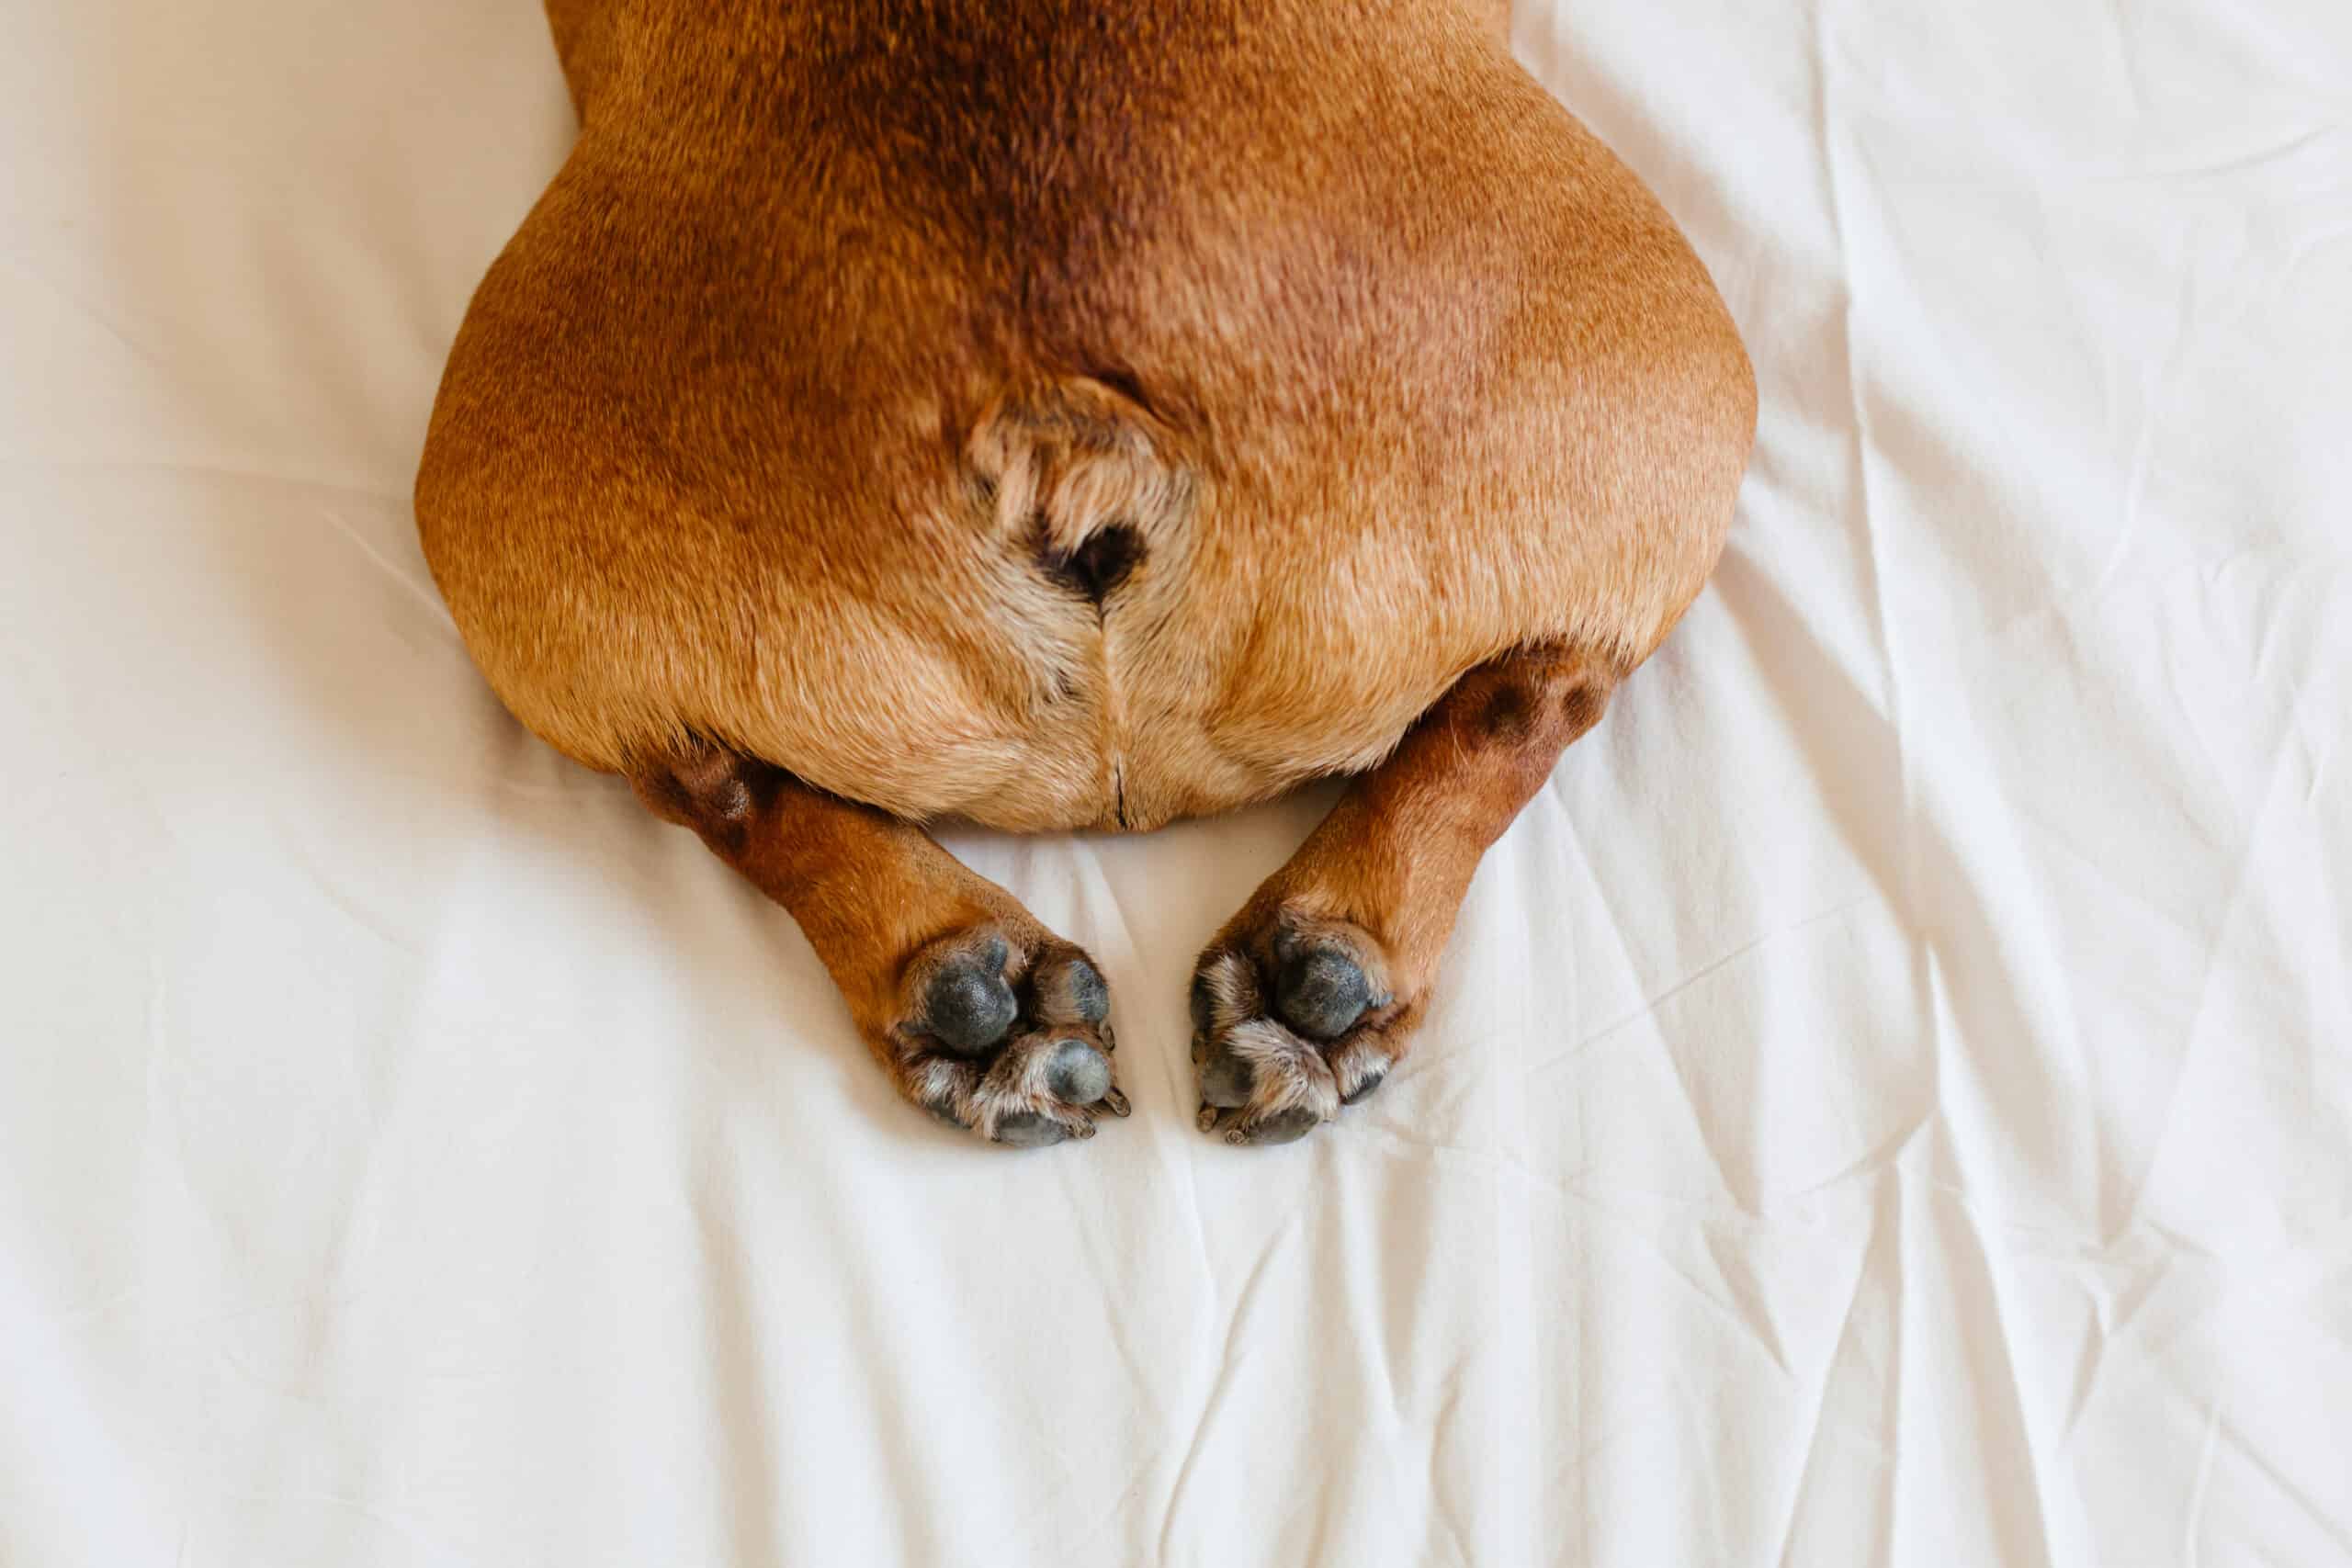 Why Do Dogs Have Swirls on Their Bum?